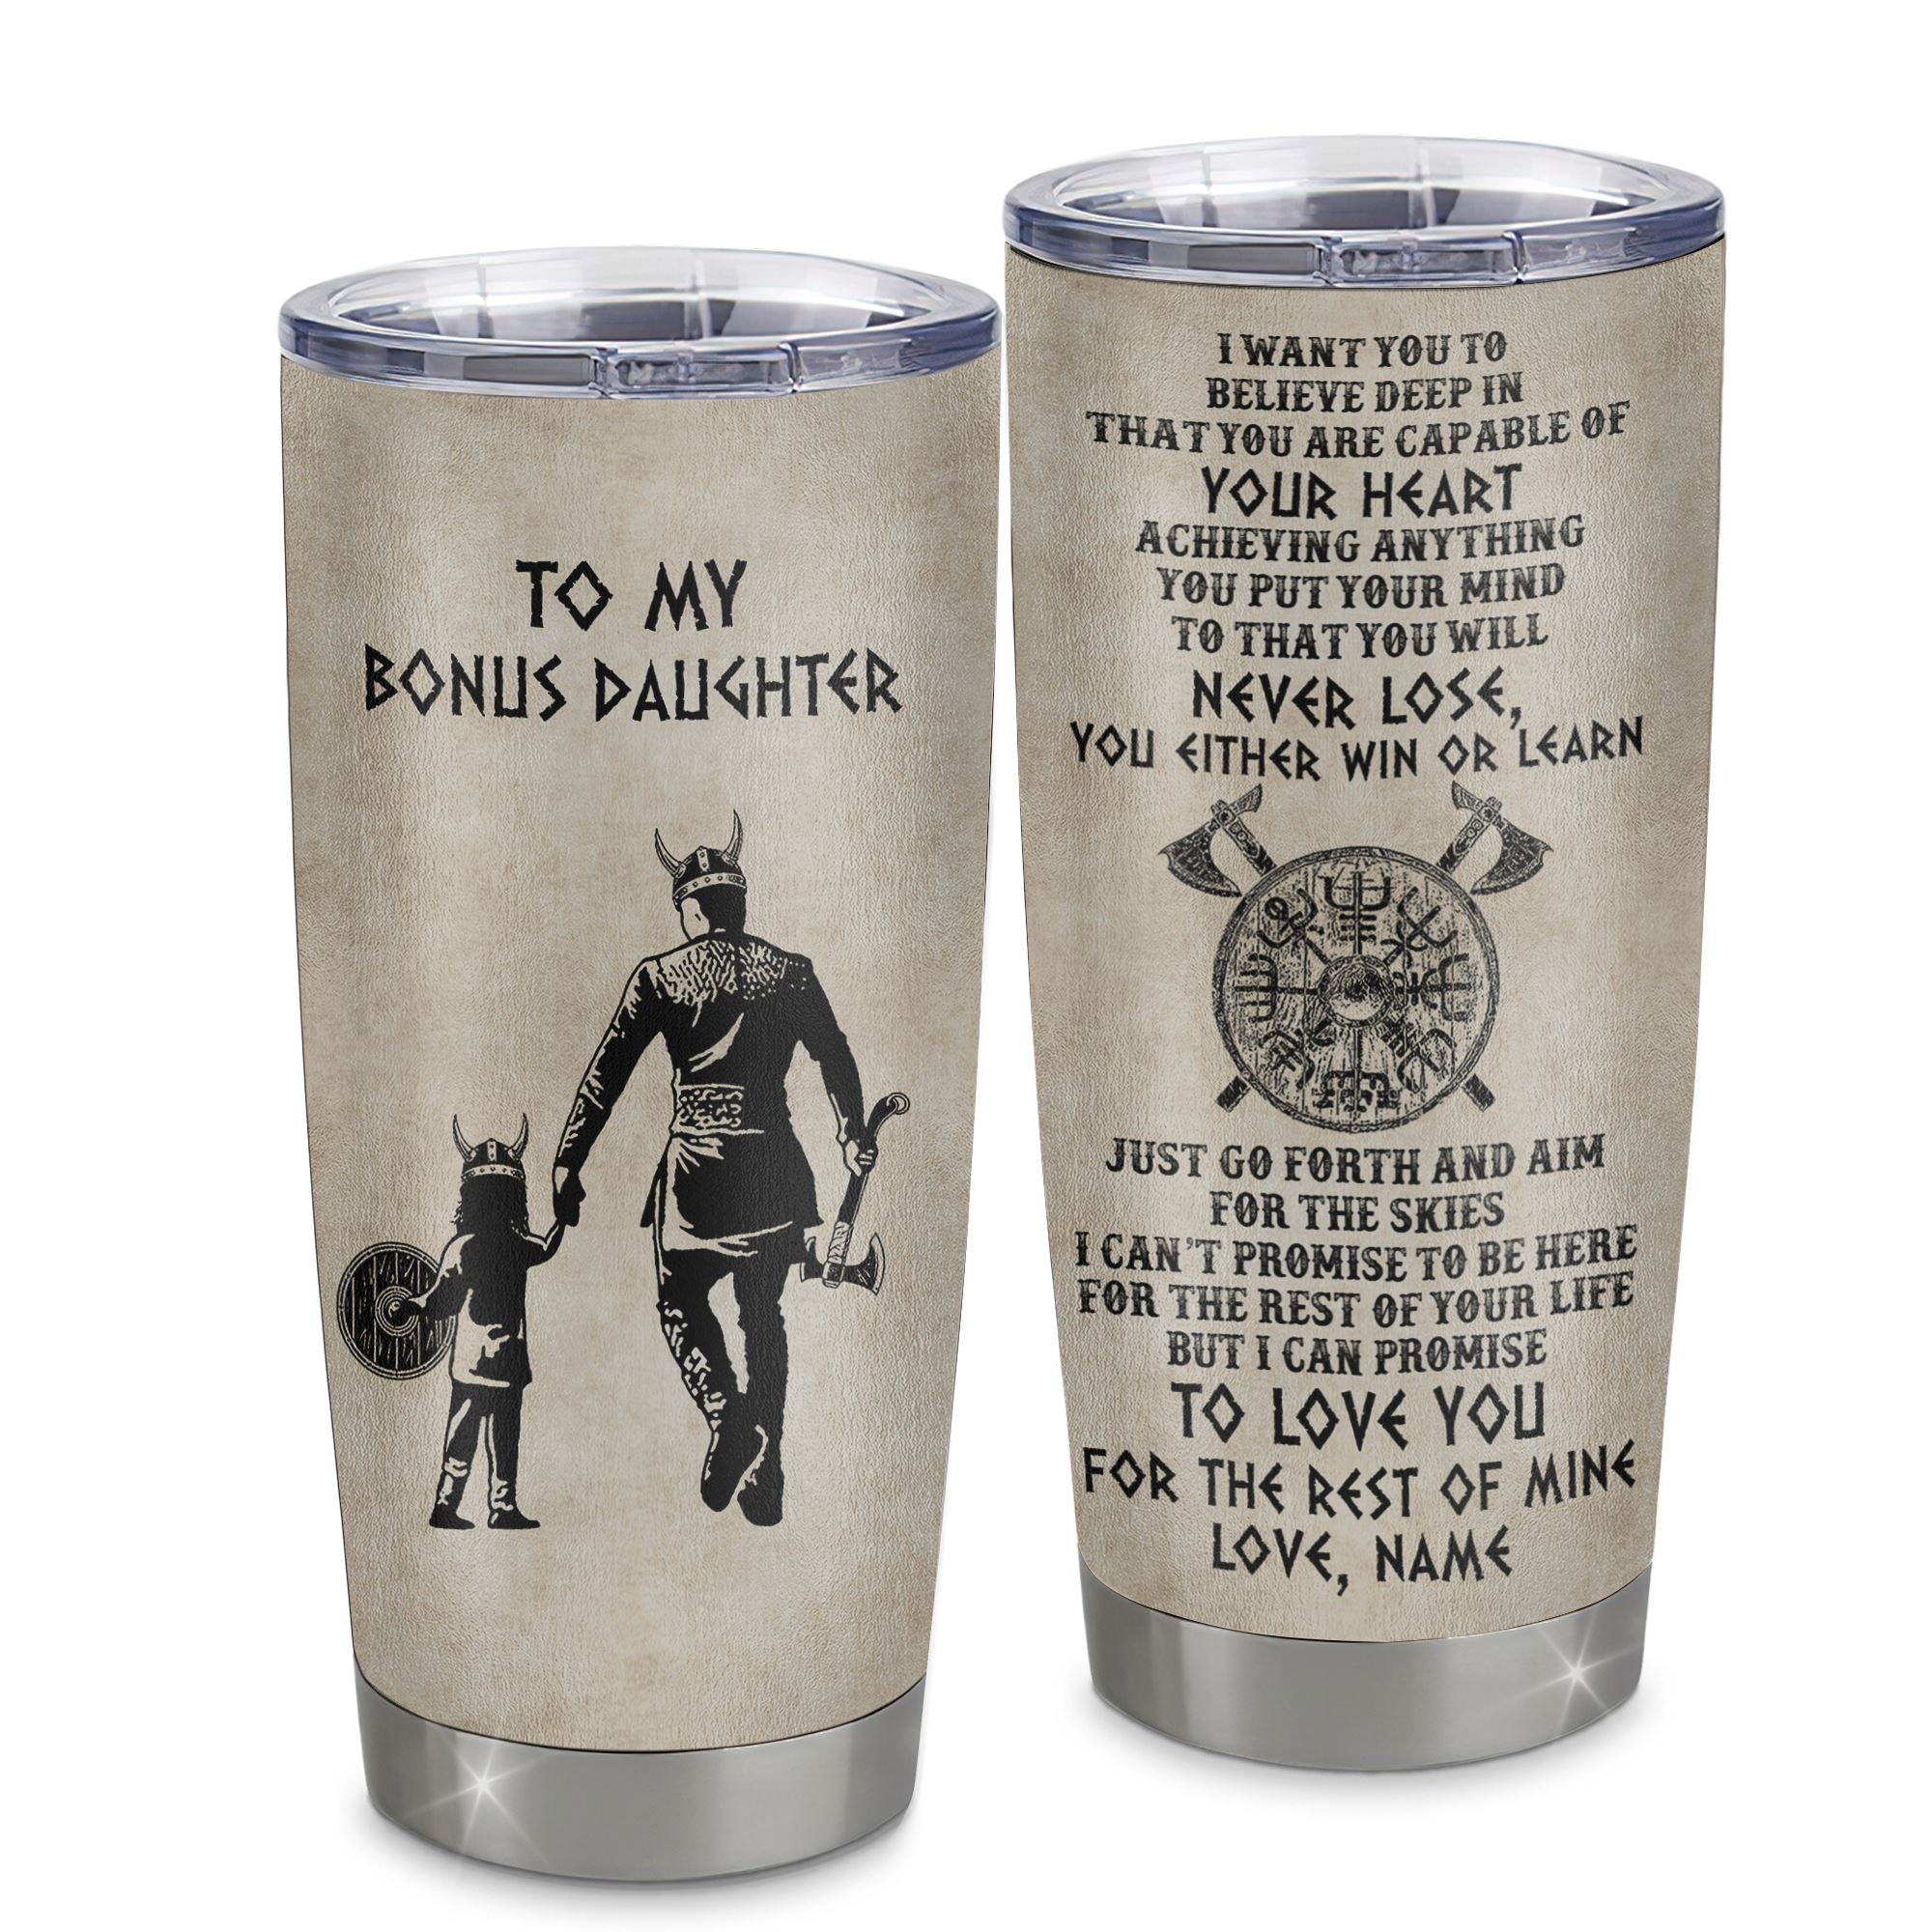 Personalized_To_My_Bonus_Daughter_Tumbler_From_Stepfather_Stainless_Steel_Cup_You_Will_Never_Lose_Viking_Stepdaughter_Birthday_Graduation_Christmas_Travel_Mug_Tumbler_mockup_1.jpg